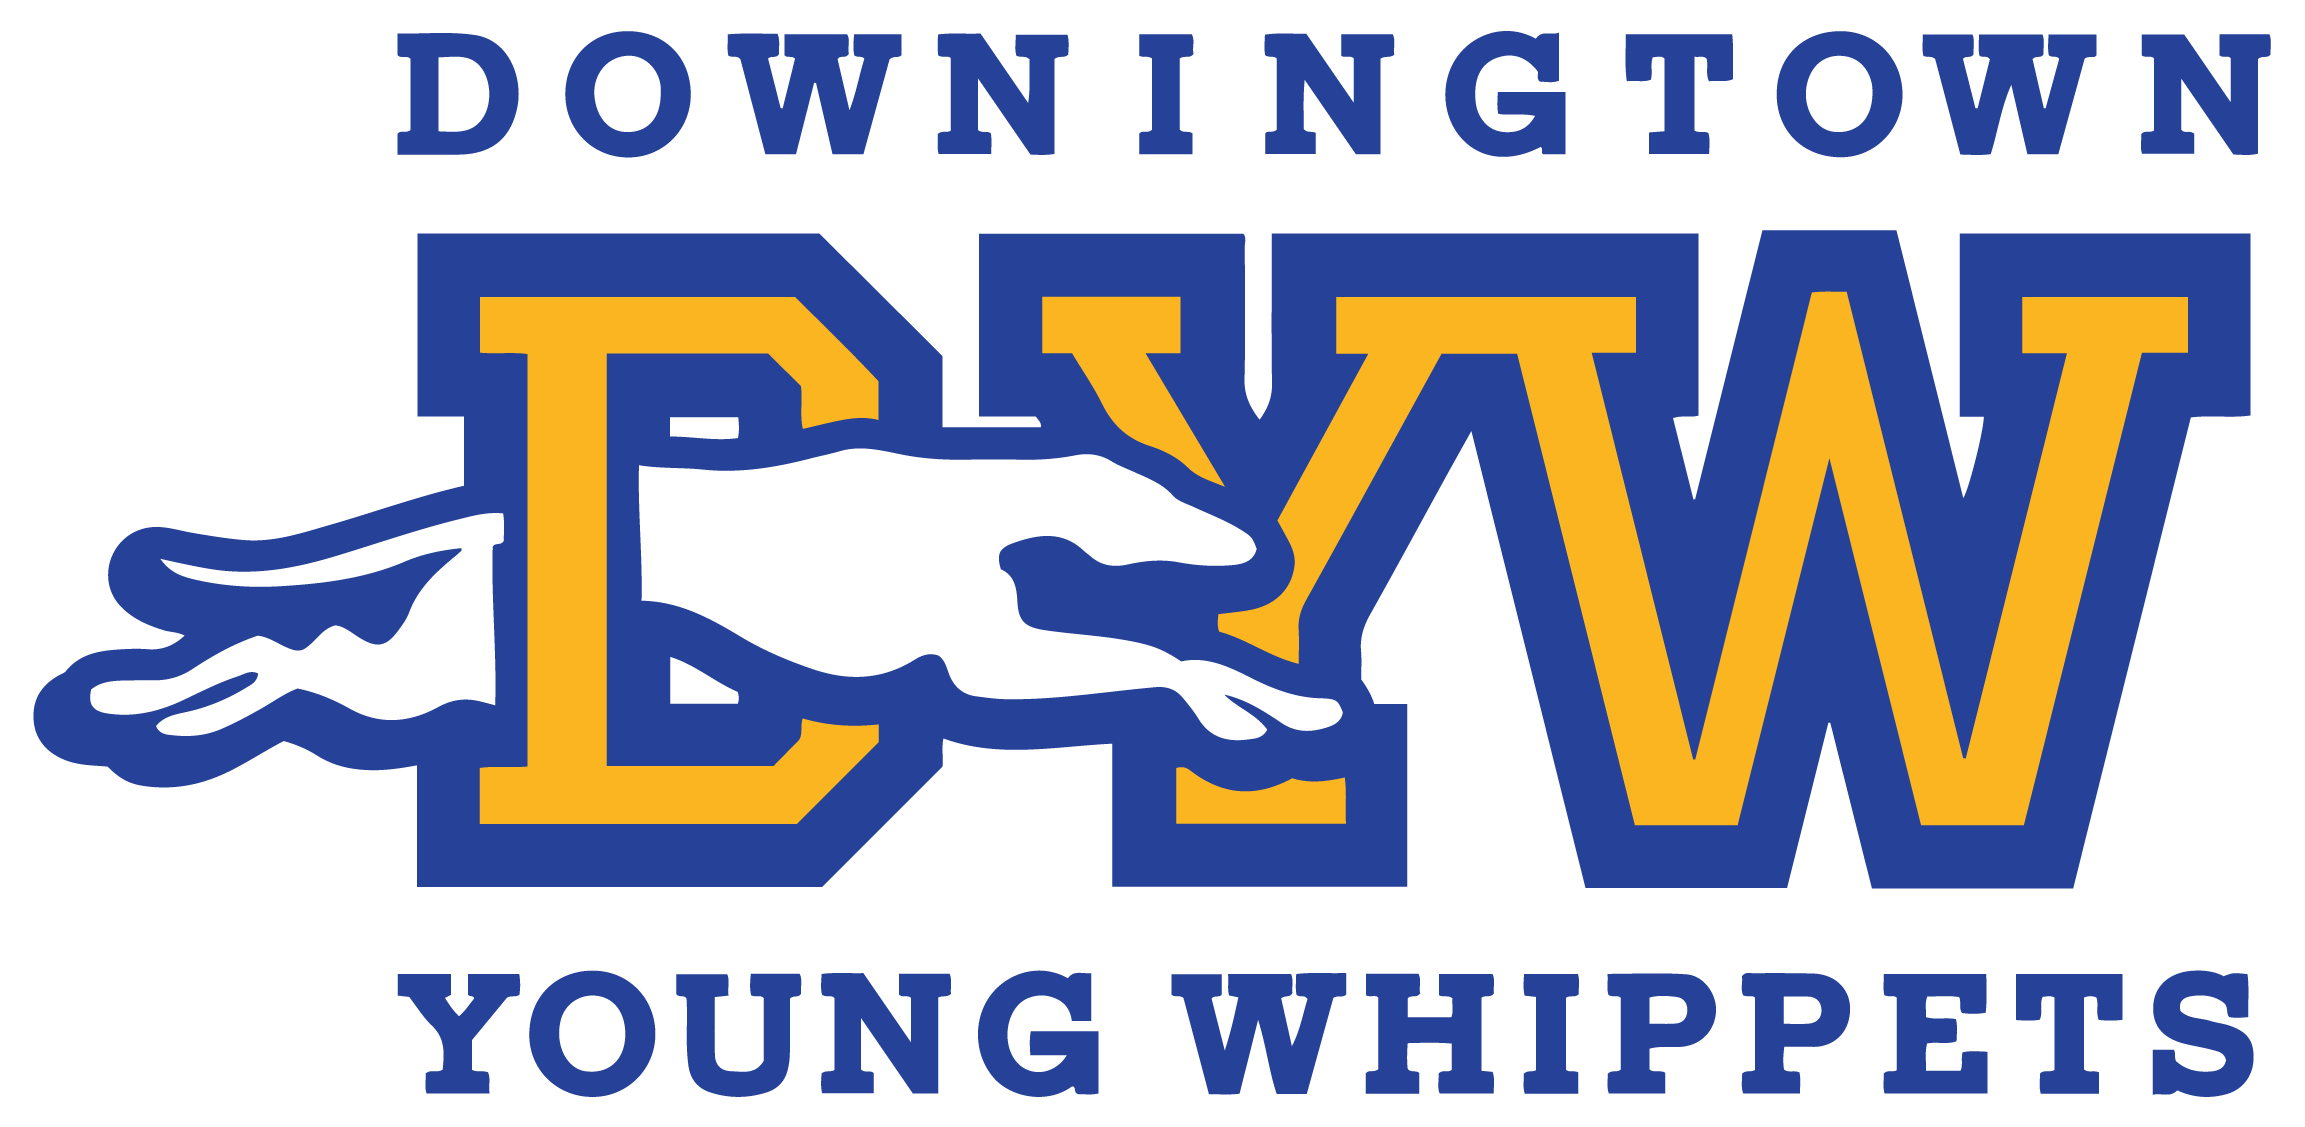 downingtownyoungwhippets